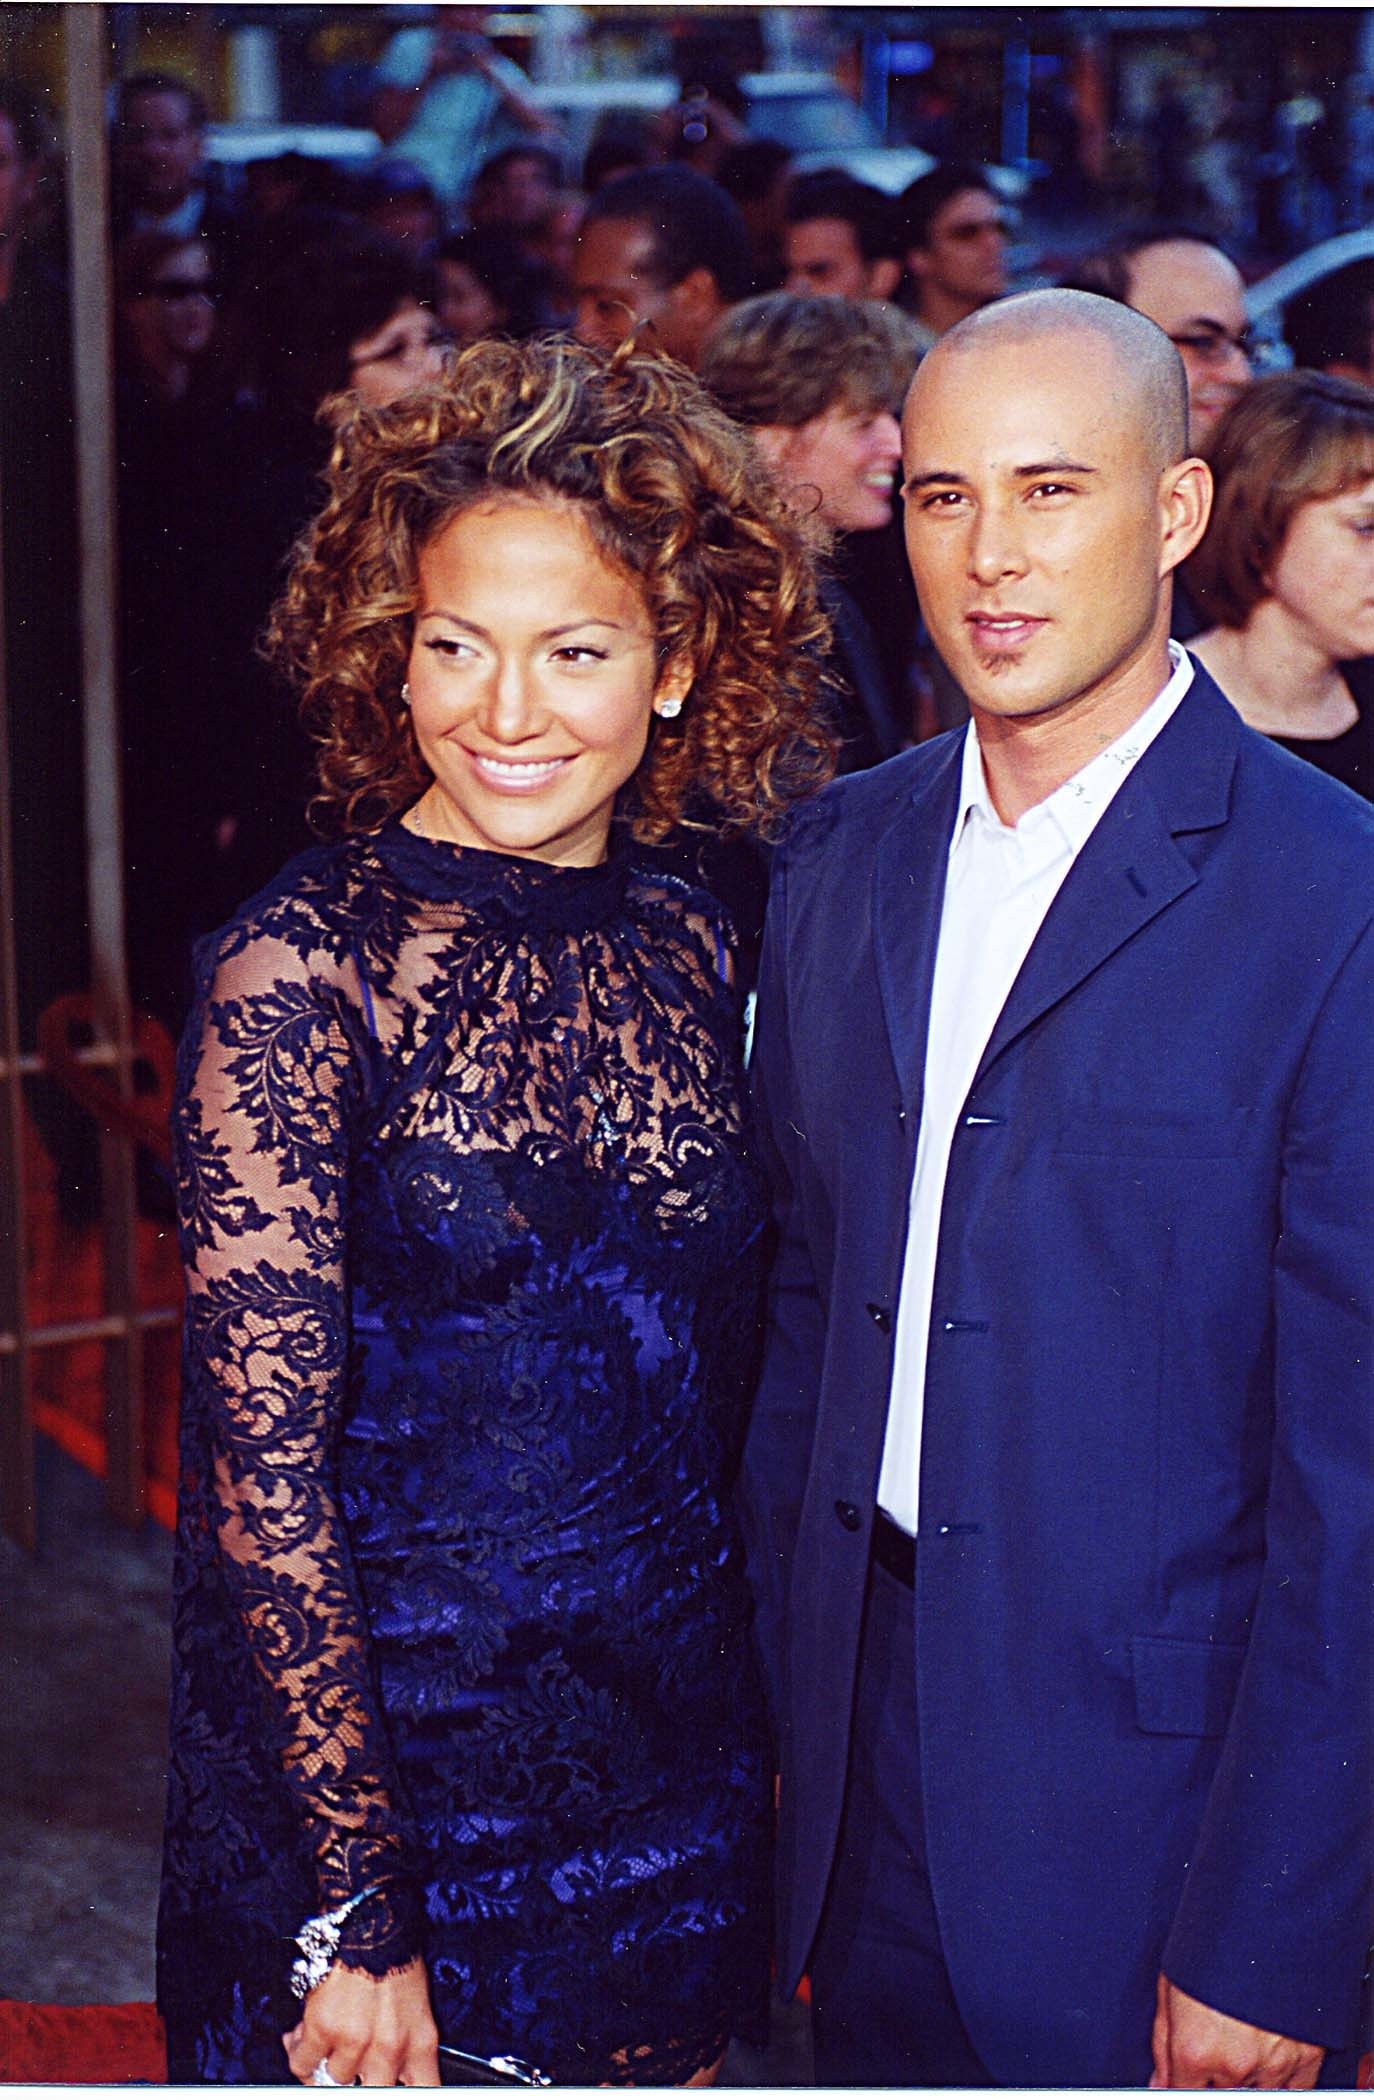 On the red carpet: JLo with curly hair and wearing a lace dress, Chris in a suit